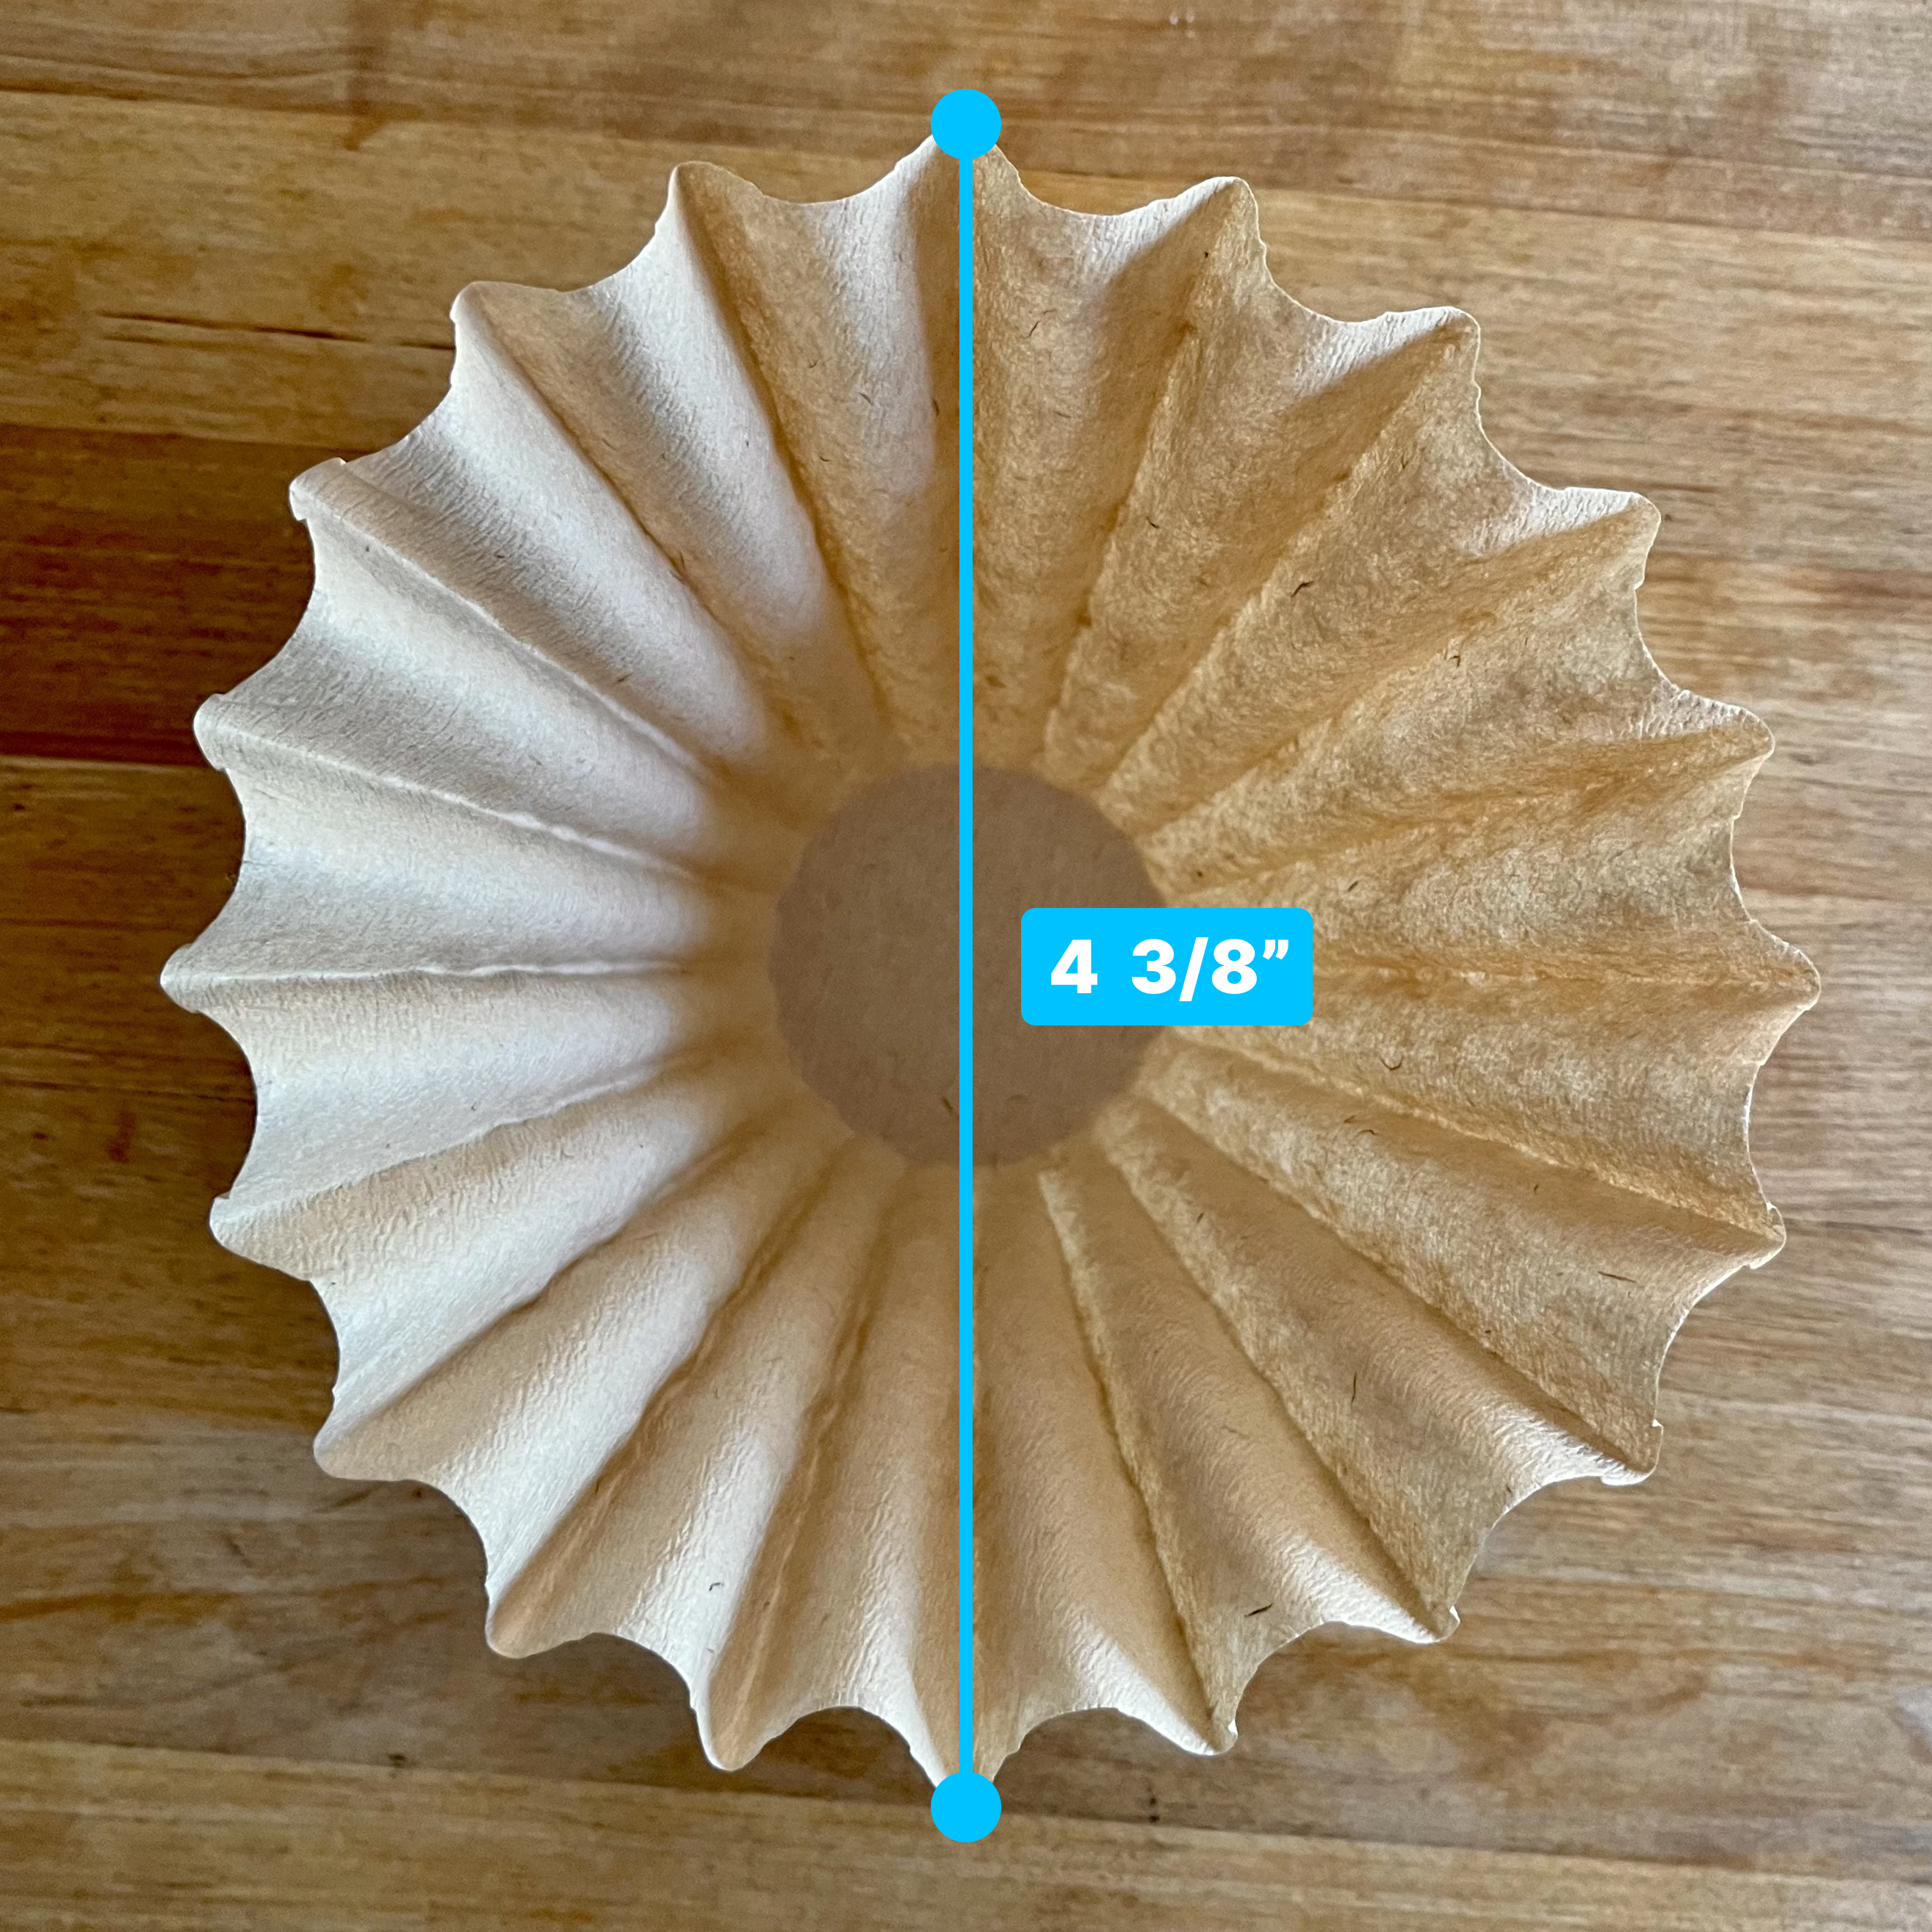 Blue Bottle Filters Dimensions - Top.png